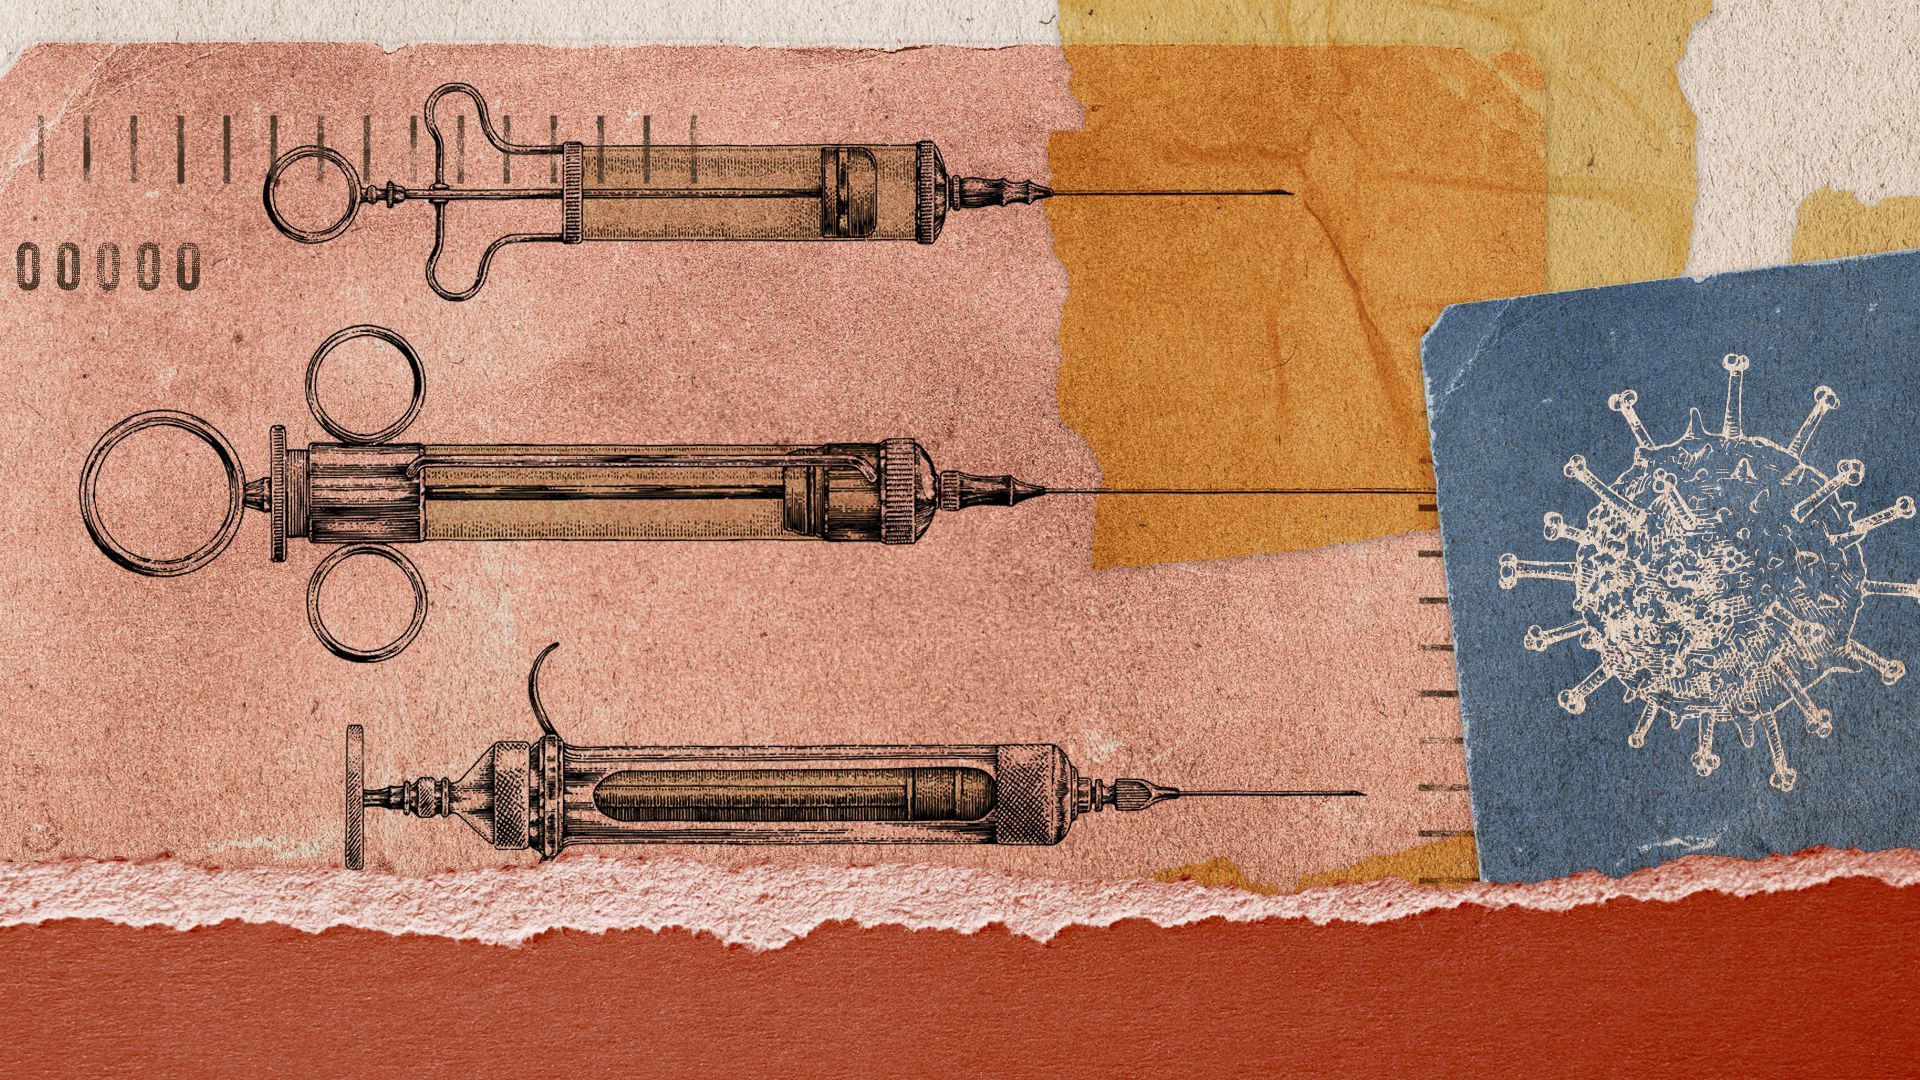 Old-fashioned illustration of syringes layered on torn paper.